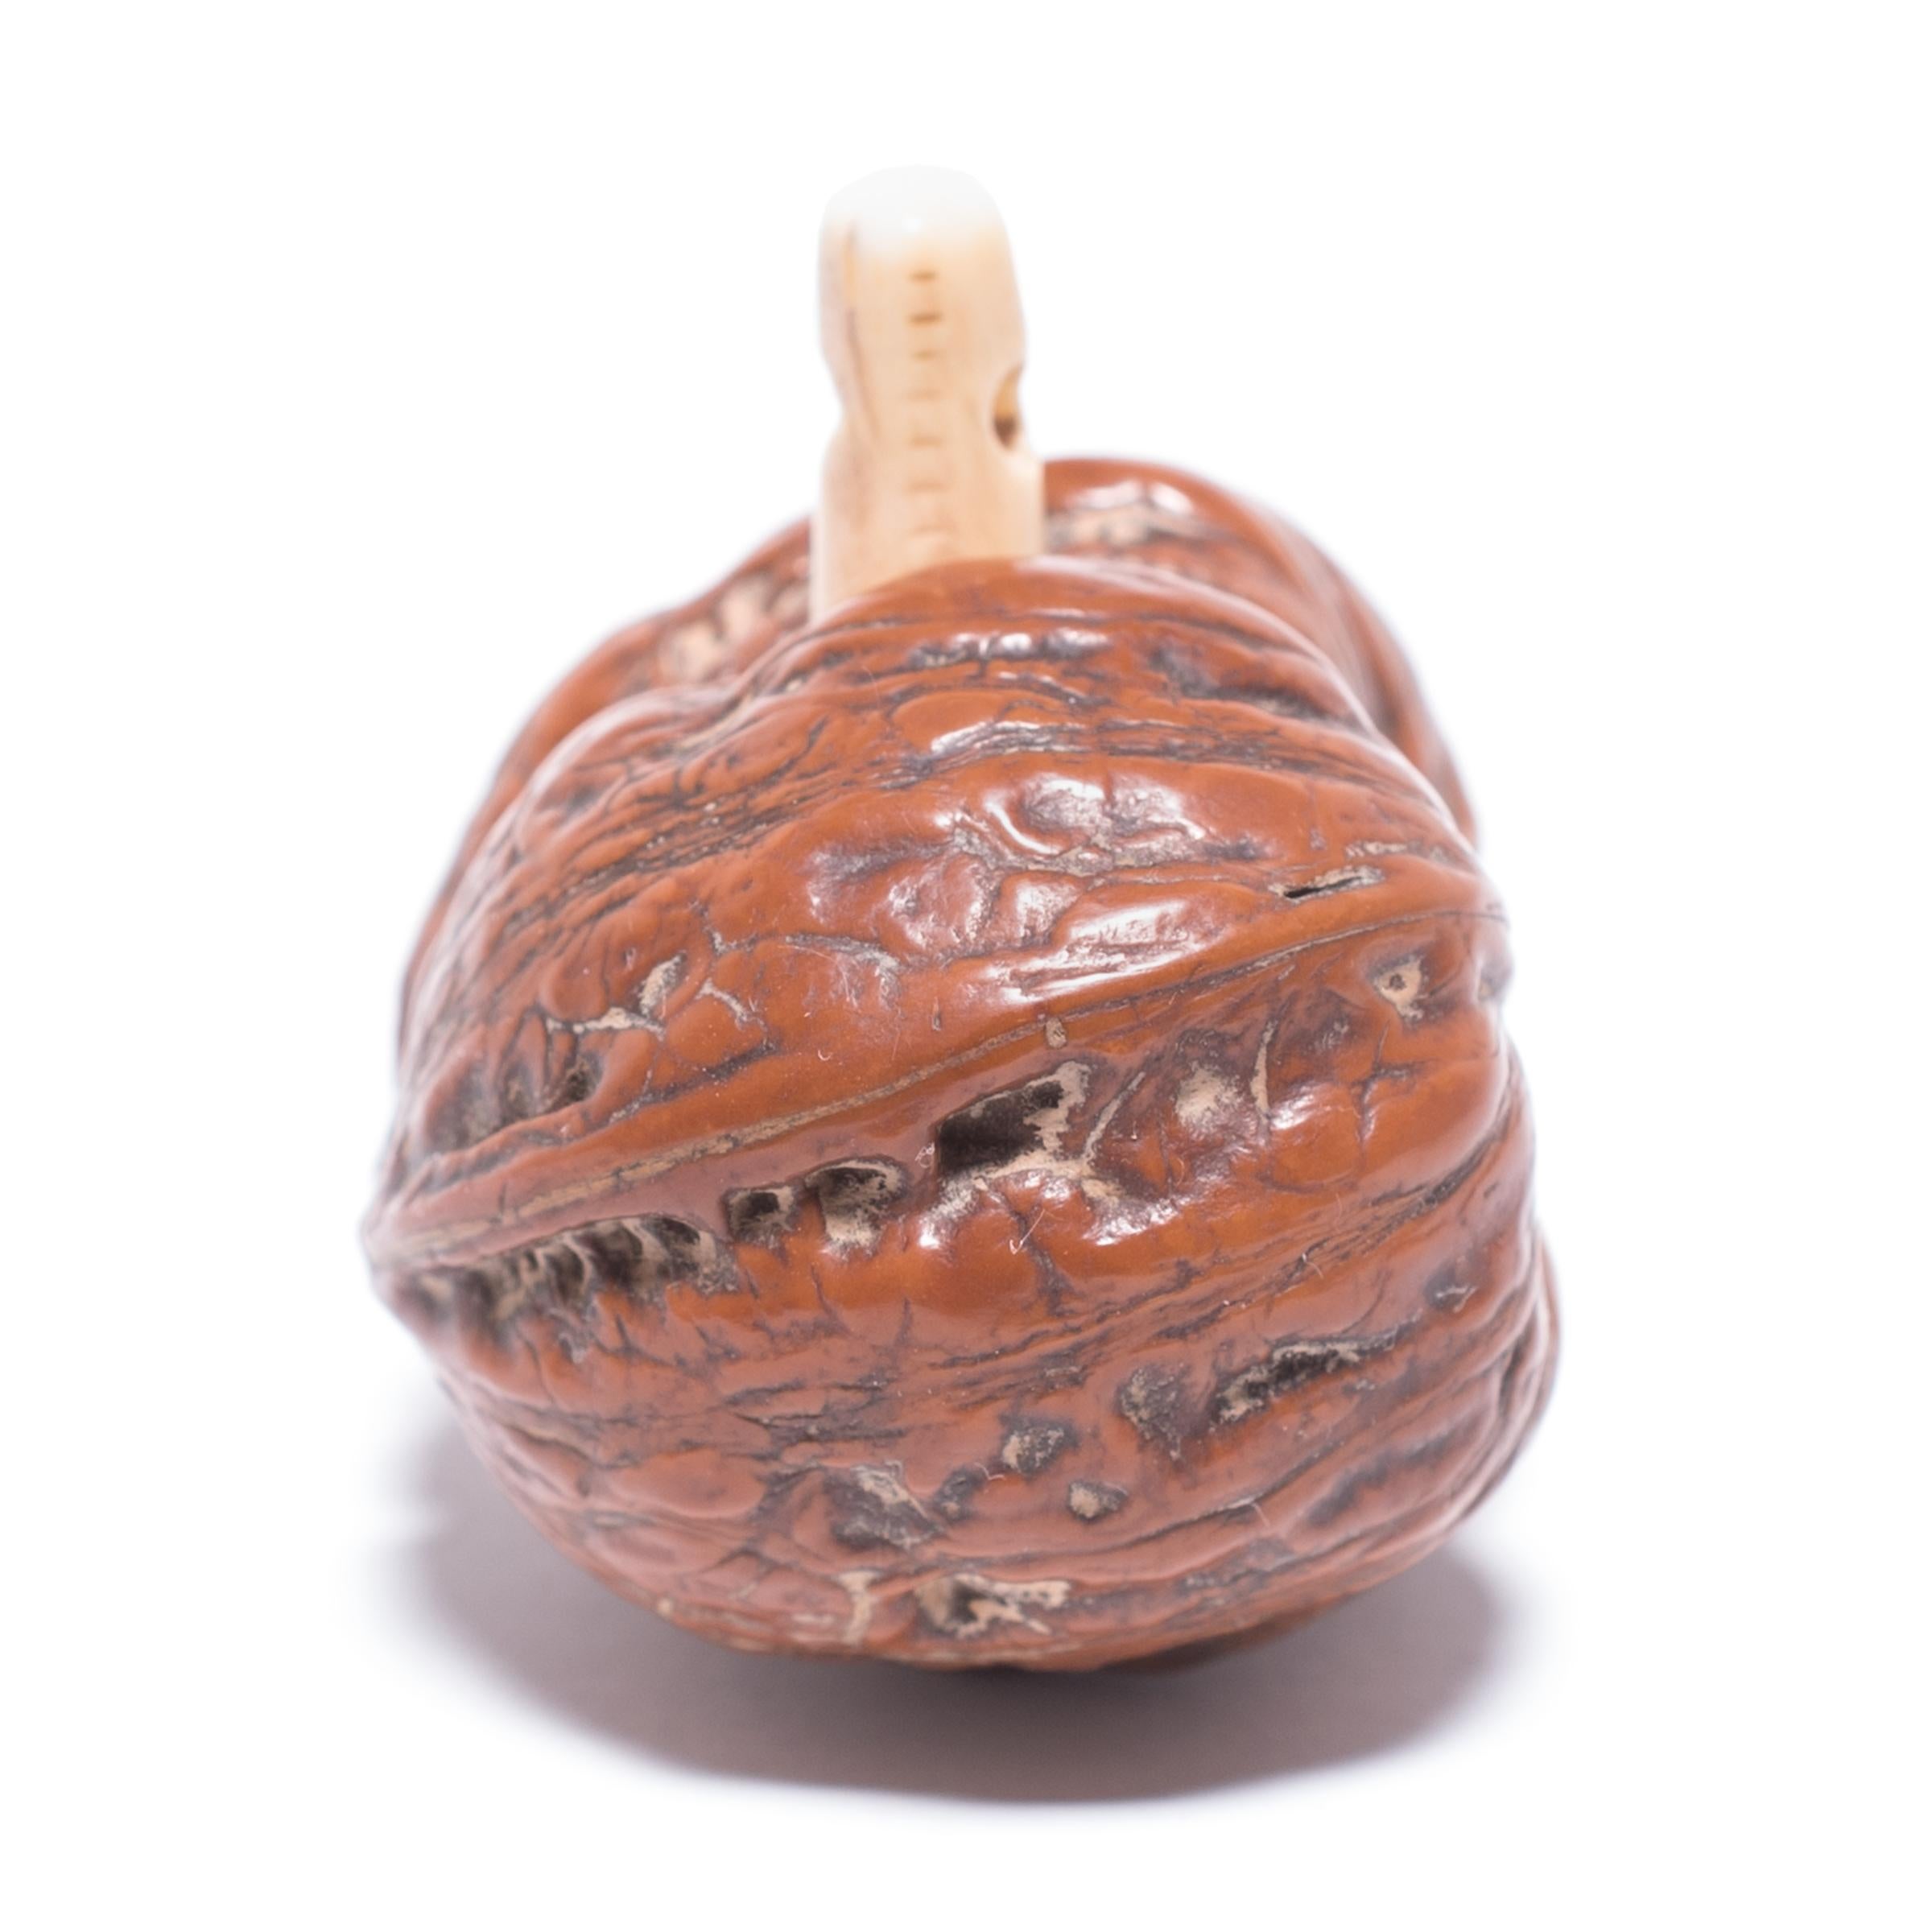 Japanese artisans have long held mastery in the creation of miniature treasures, or netsuke. This gourd is ingeniously carved out of a walnut shell with a polished bone spur acting as the stem at the gourd's top. A symbol of divinity, good fortune